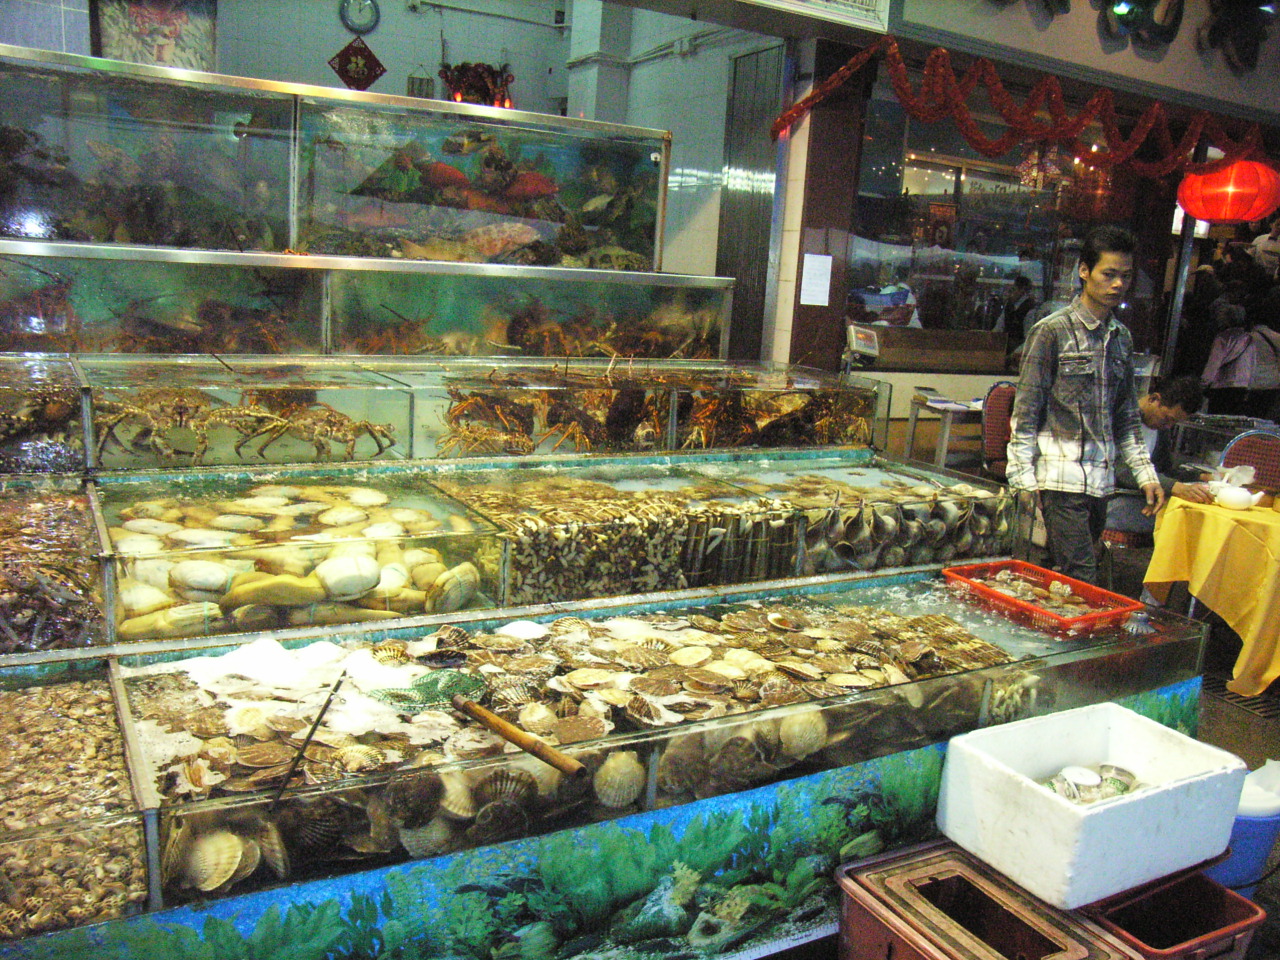 Chinese Need to Eat Fish. But How to Eat Fish Sustainably?